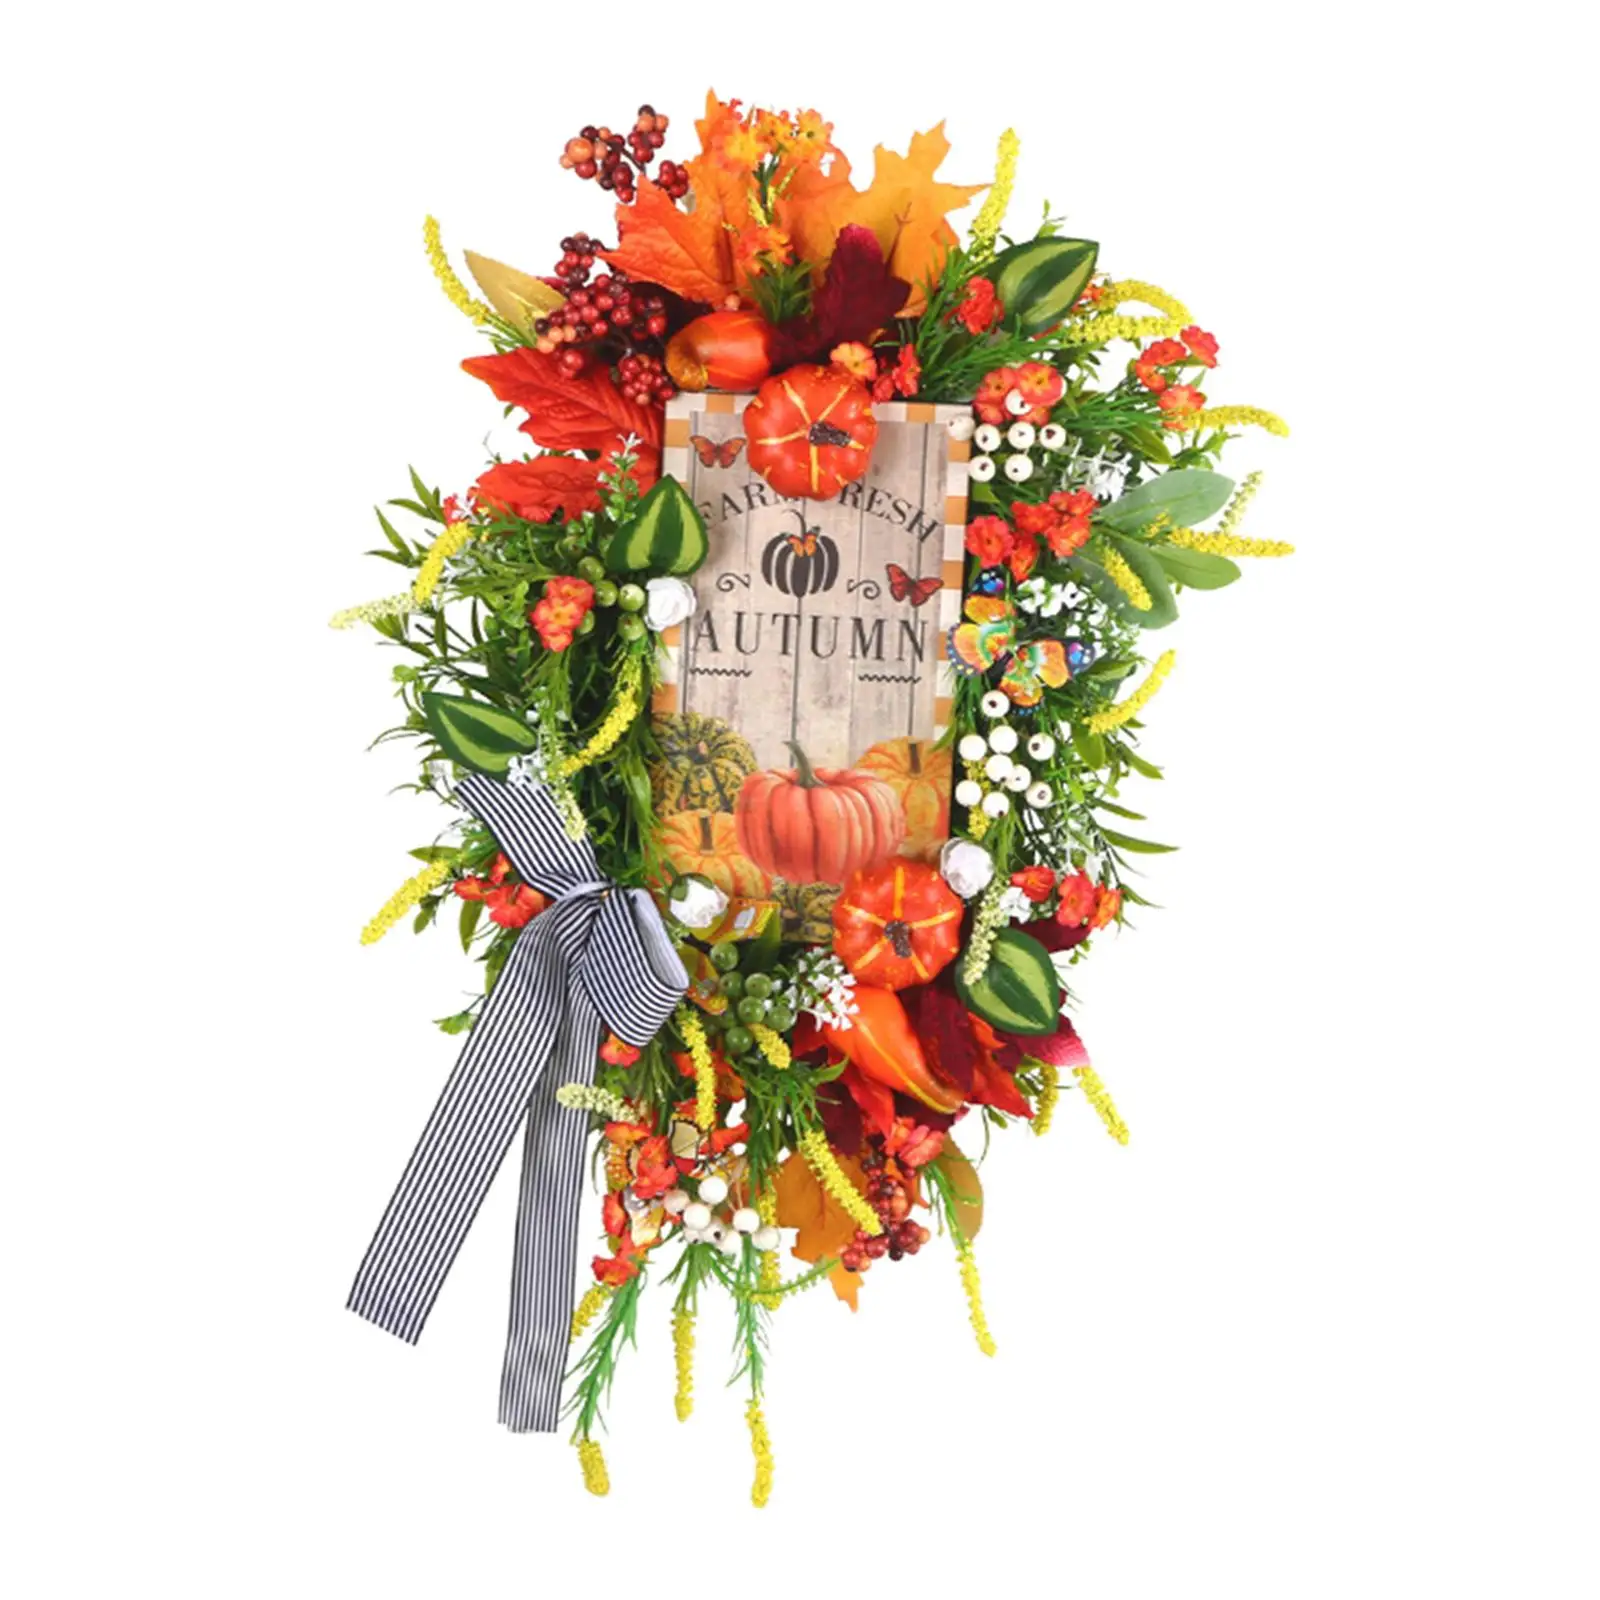 Artificial Fall Harvest Wreath Floral Wreath Wall Decor Door Wreath Autumn Garland for Indoor Outdoor Wall Easter Festival Party